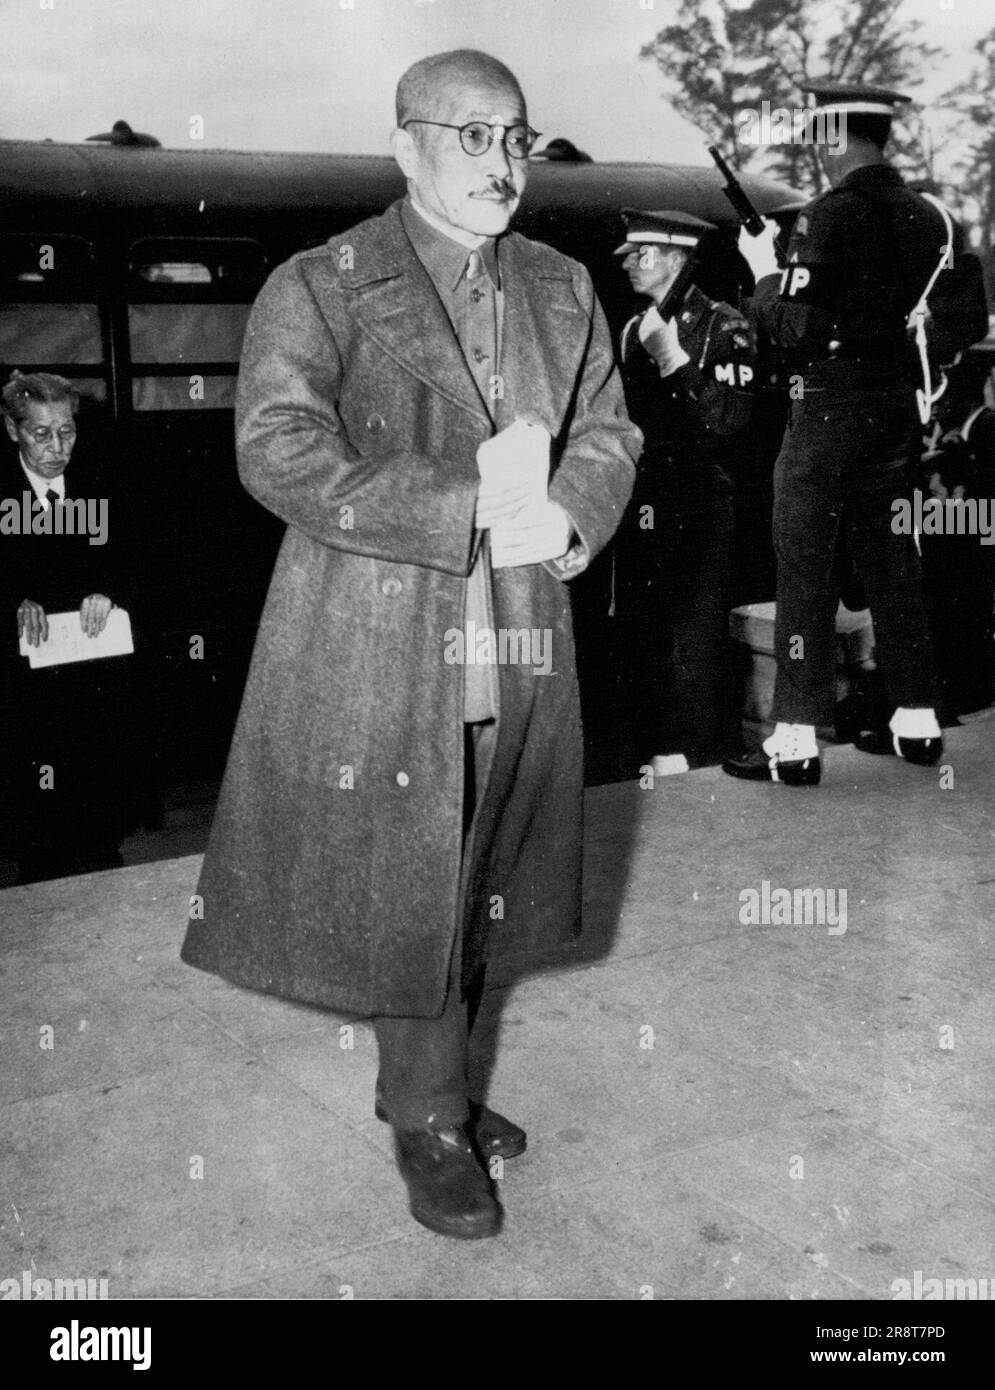 Tojo Arrives for Sentence -- Hideki Tojo, former Prime Minister and War Minister of Japan, leaves a heavily guarded bus at the International Military Tribunal, Far East, building in Tokyo, Nov. 12 to hear the death sentence pronounced. November 14, 1948. (Photo by AP Wirephoto). Stock Photo